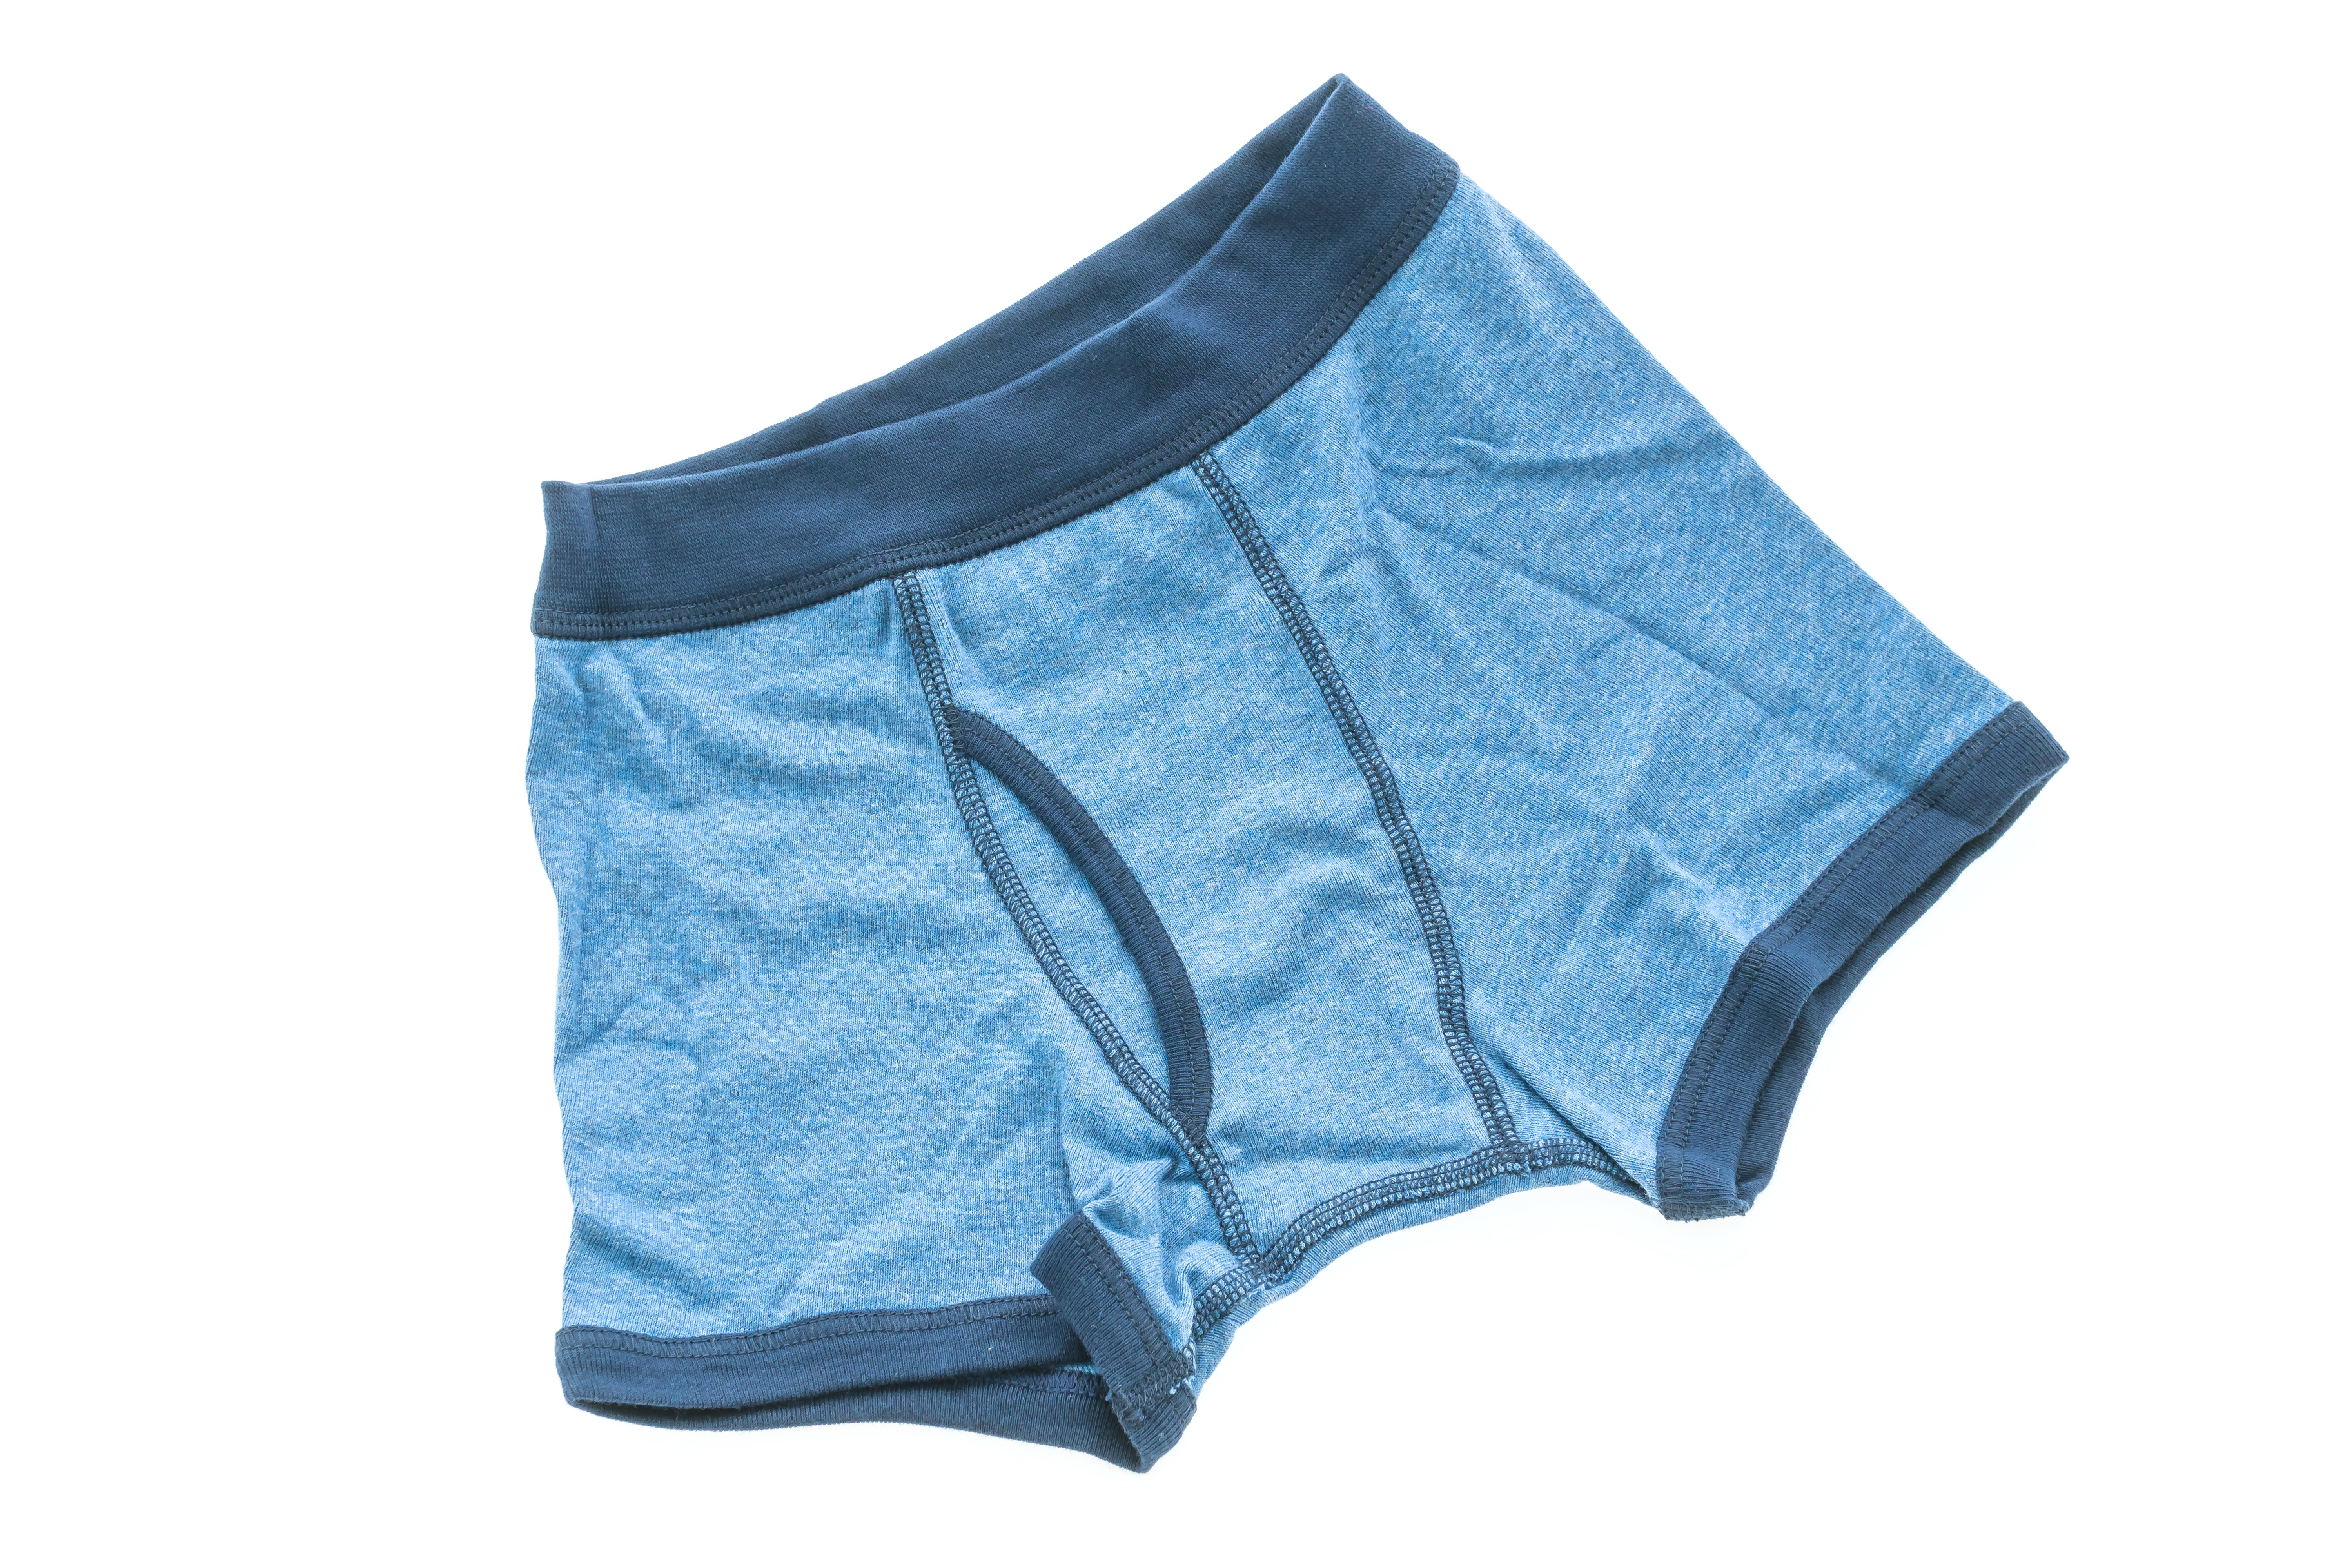 Men's Boxers: What's The Hole For? It's Not Just For Peeing